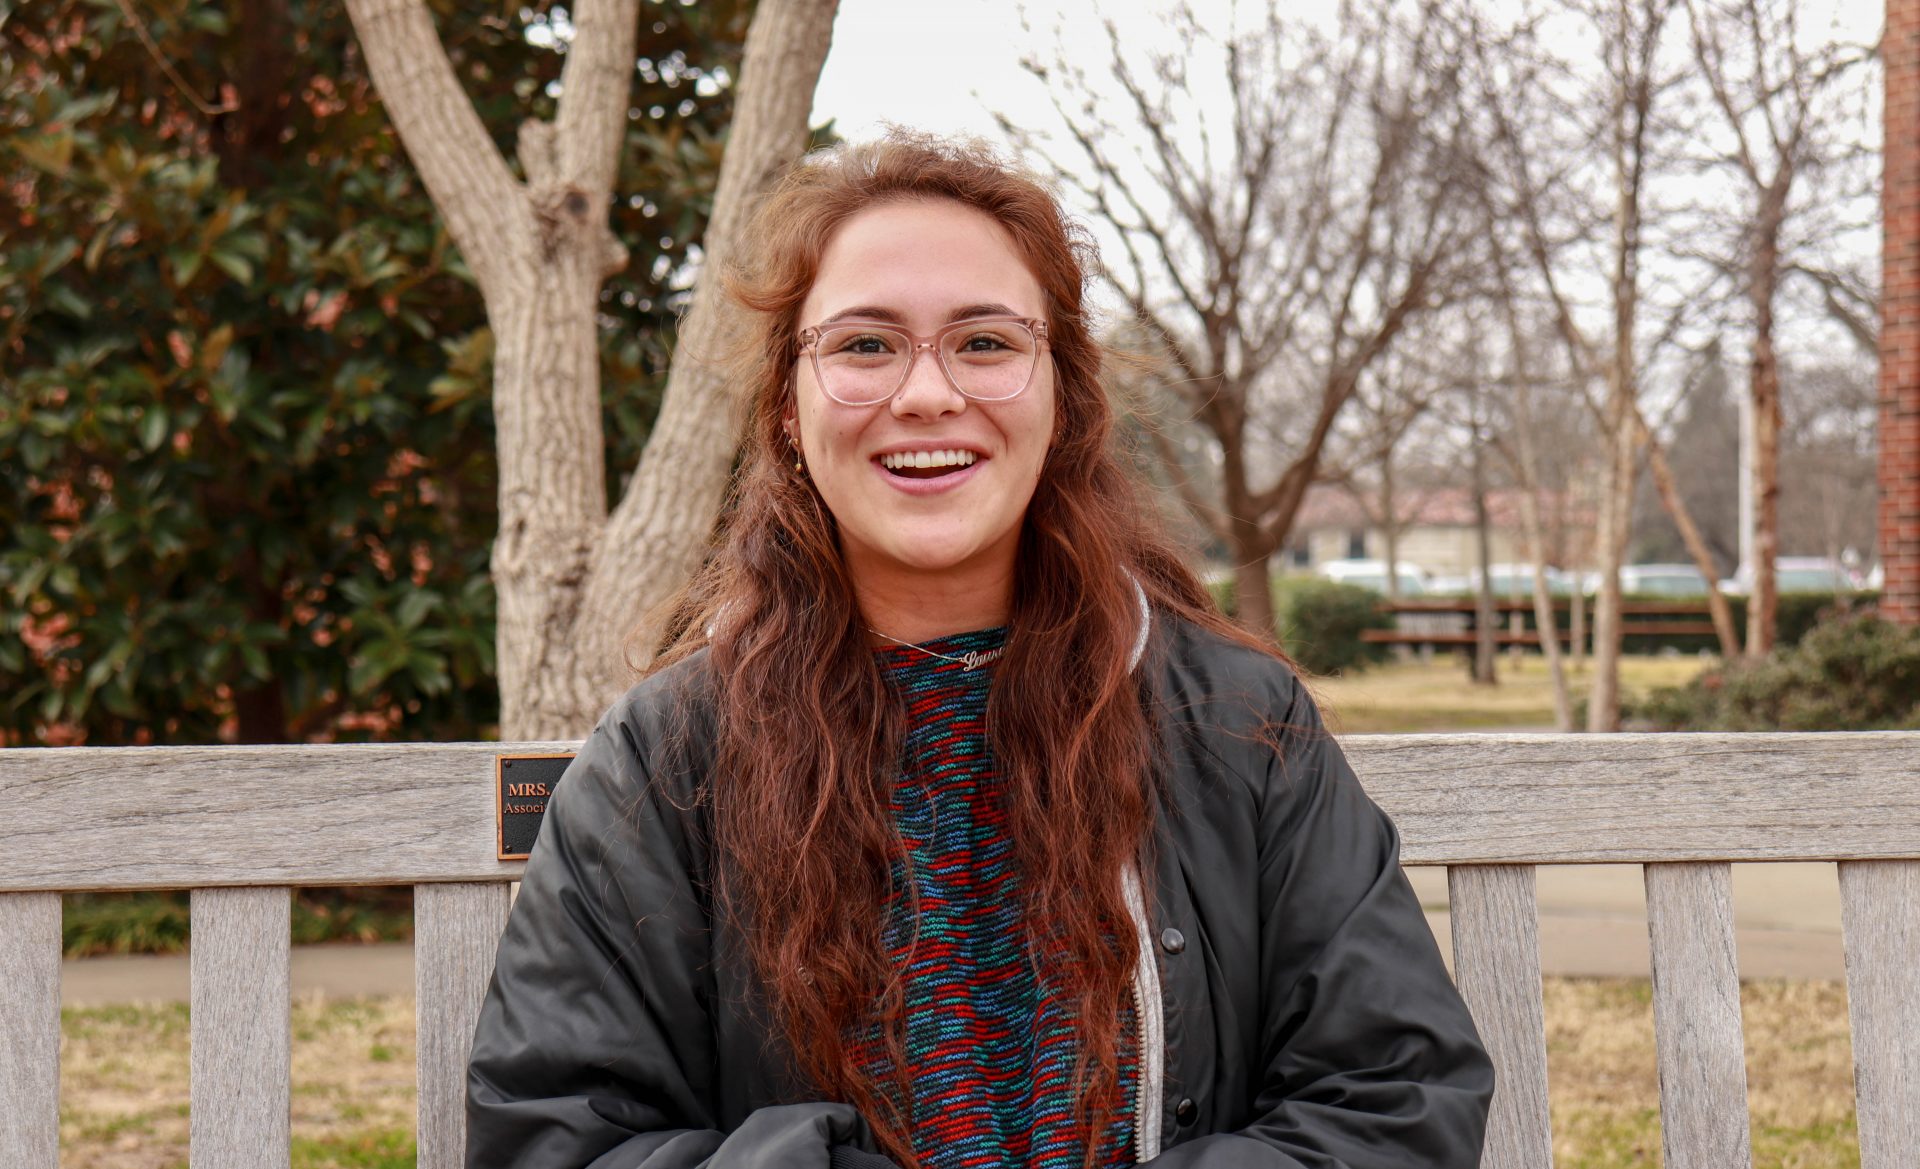 Lauren Atkins sits on a bench on the University of Oklahoma's campus.